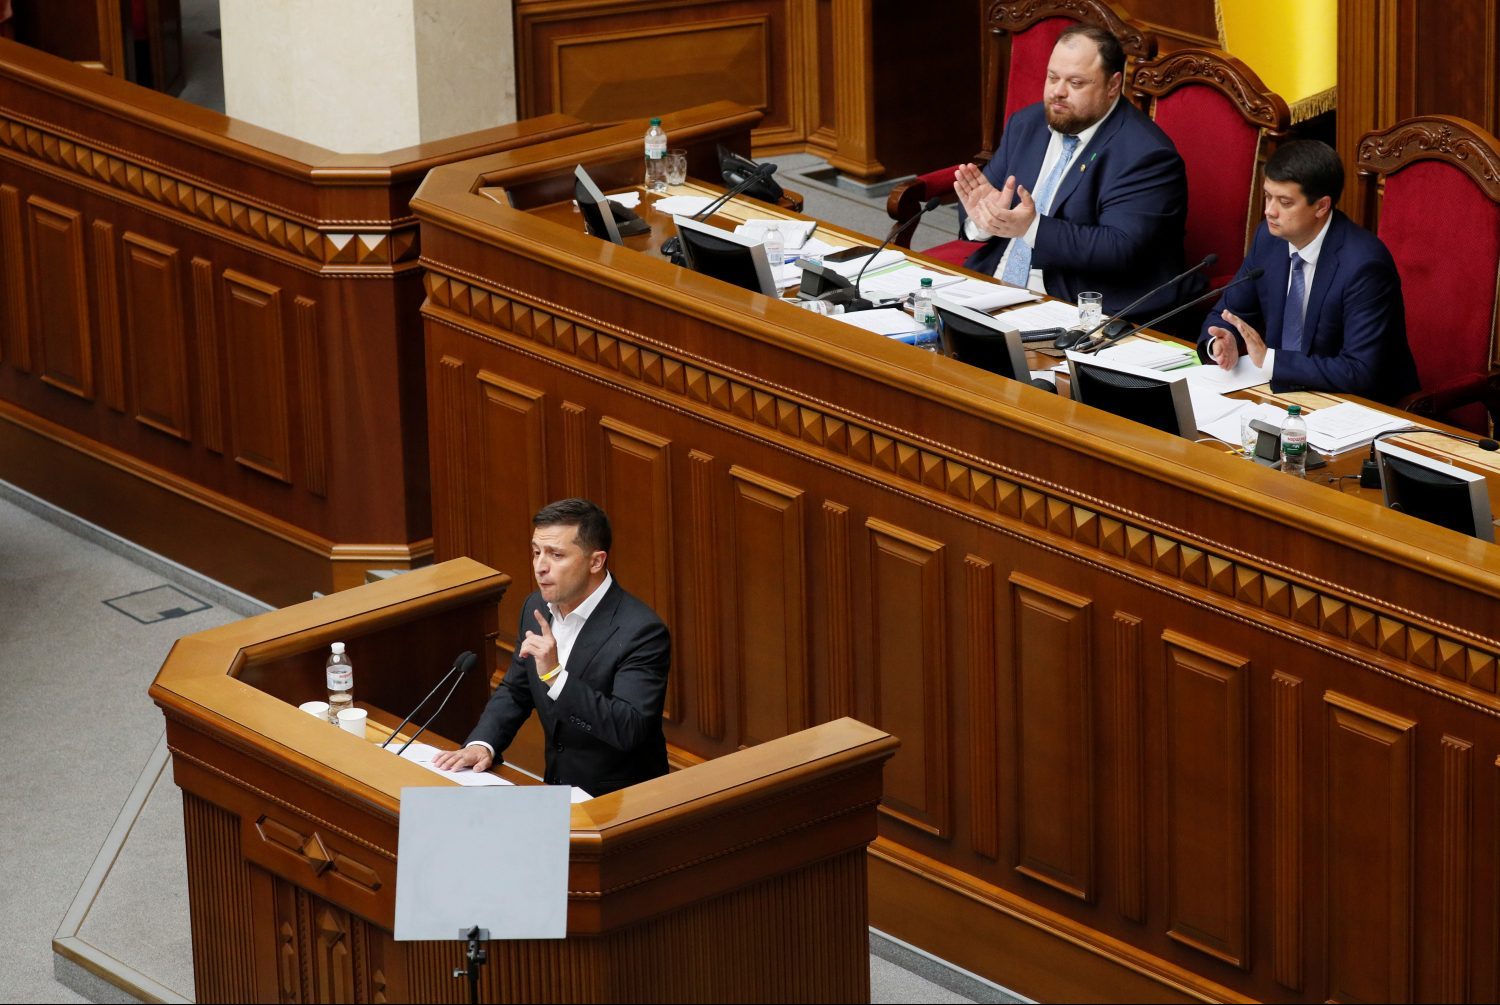 Zelenskyy at home: One year of domestic reform?